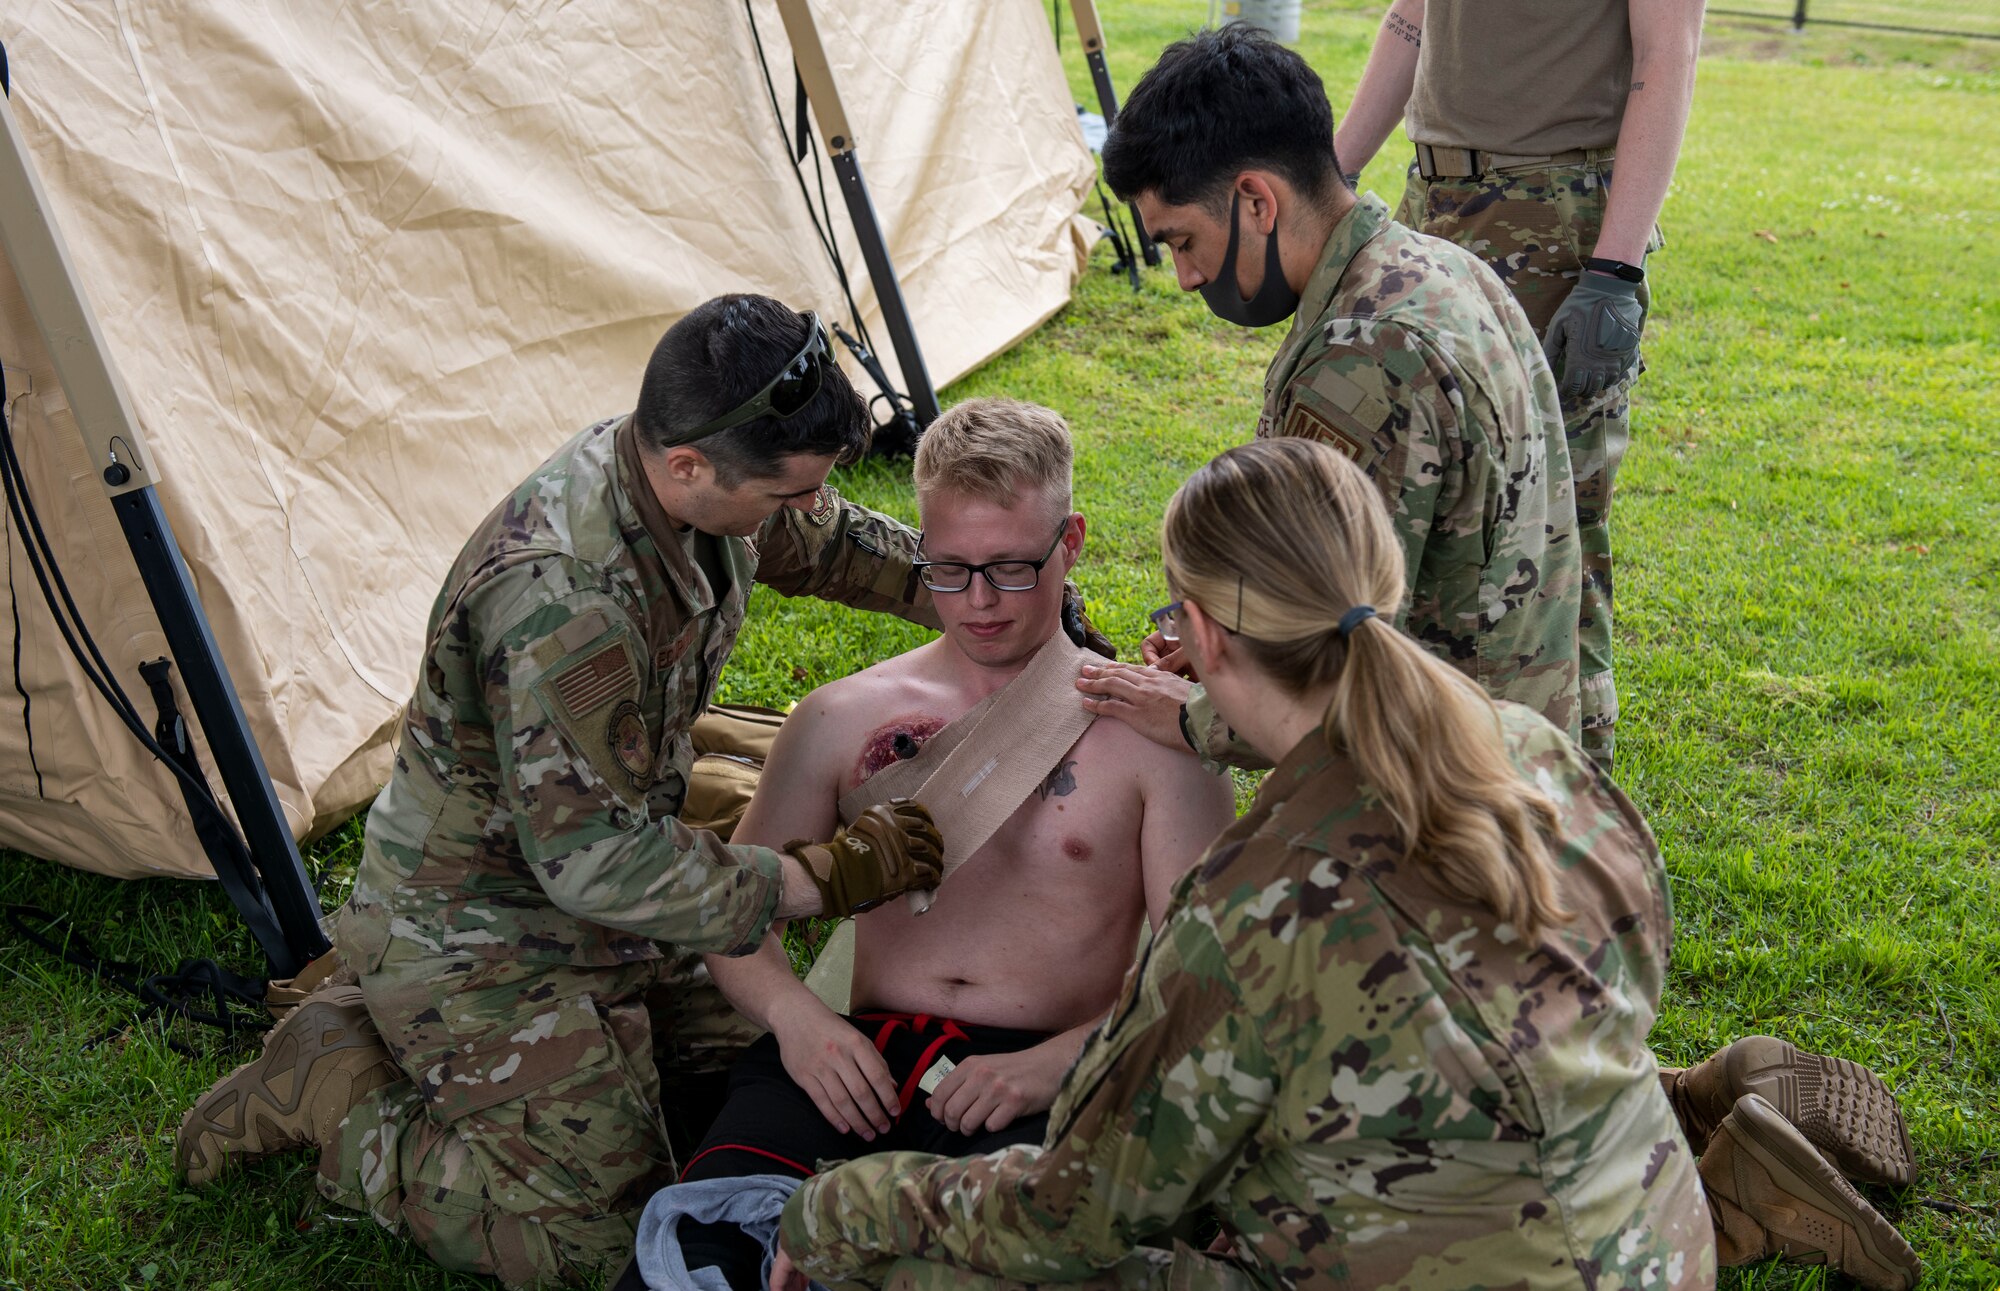 Personnel from the 374th Medical Group wrap a bandage on a fake wound